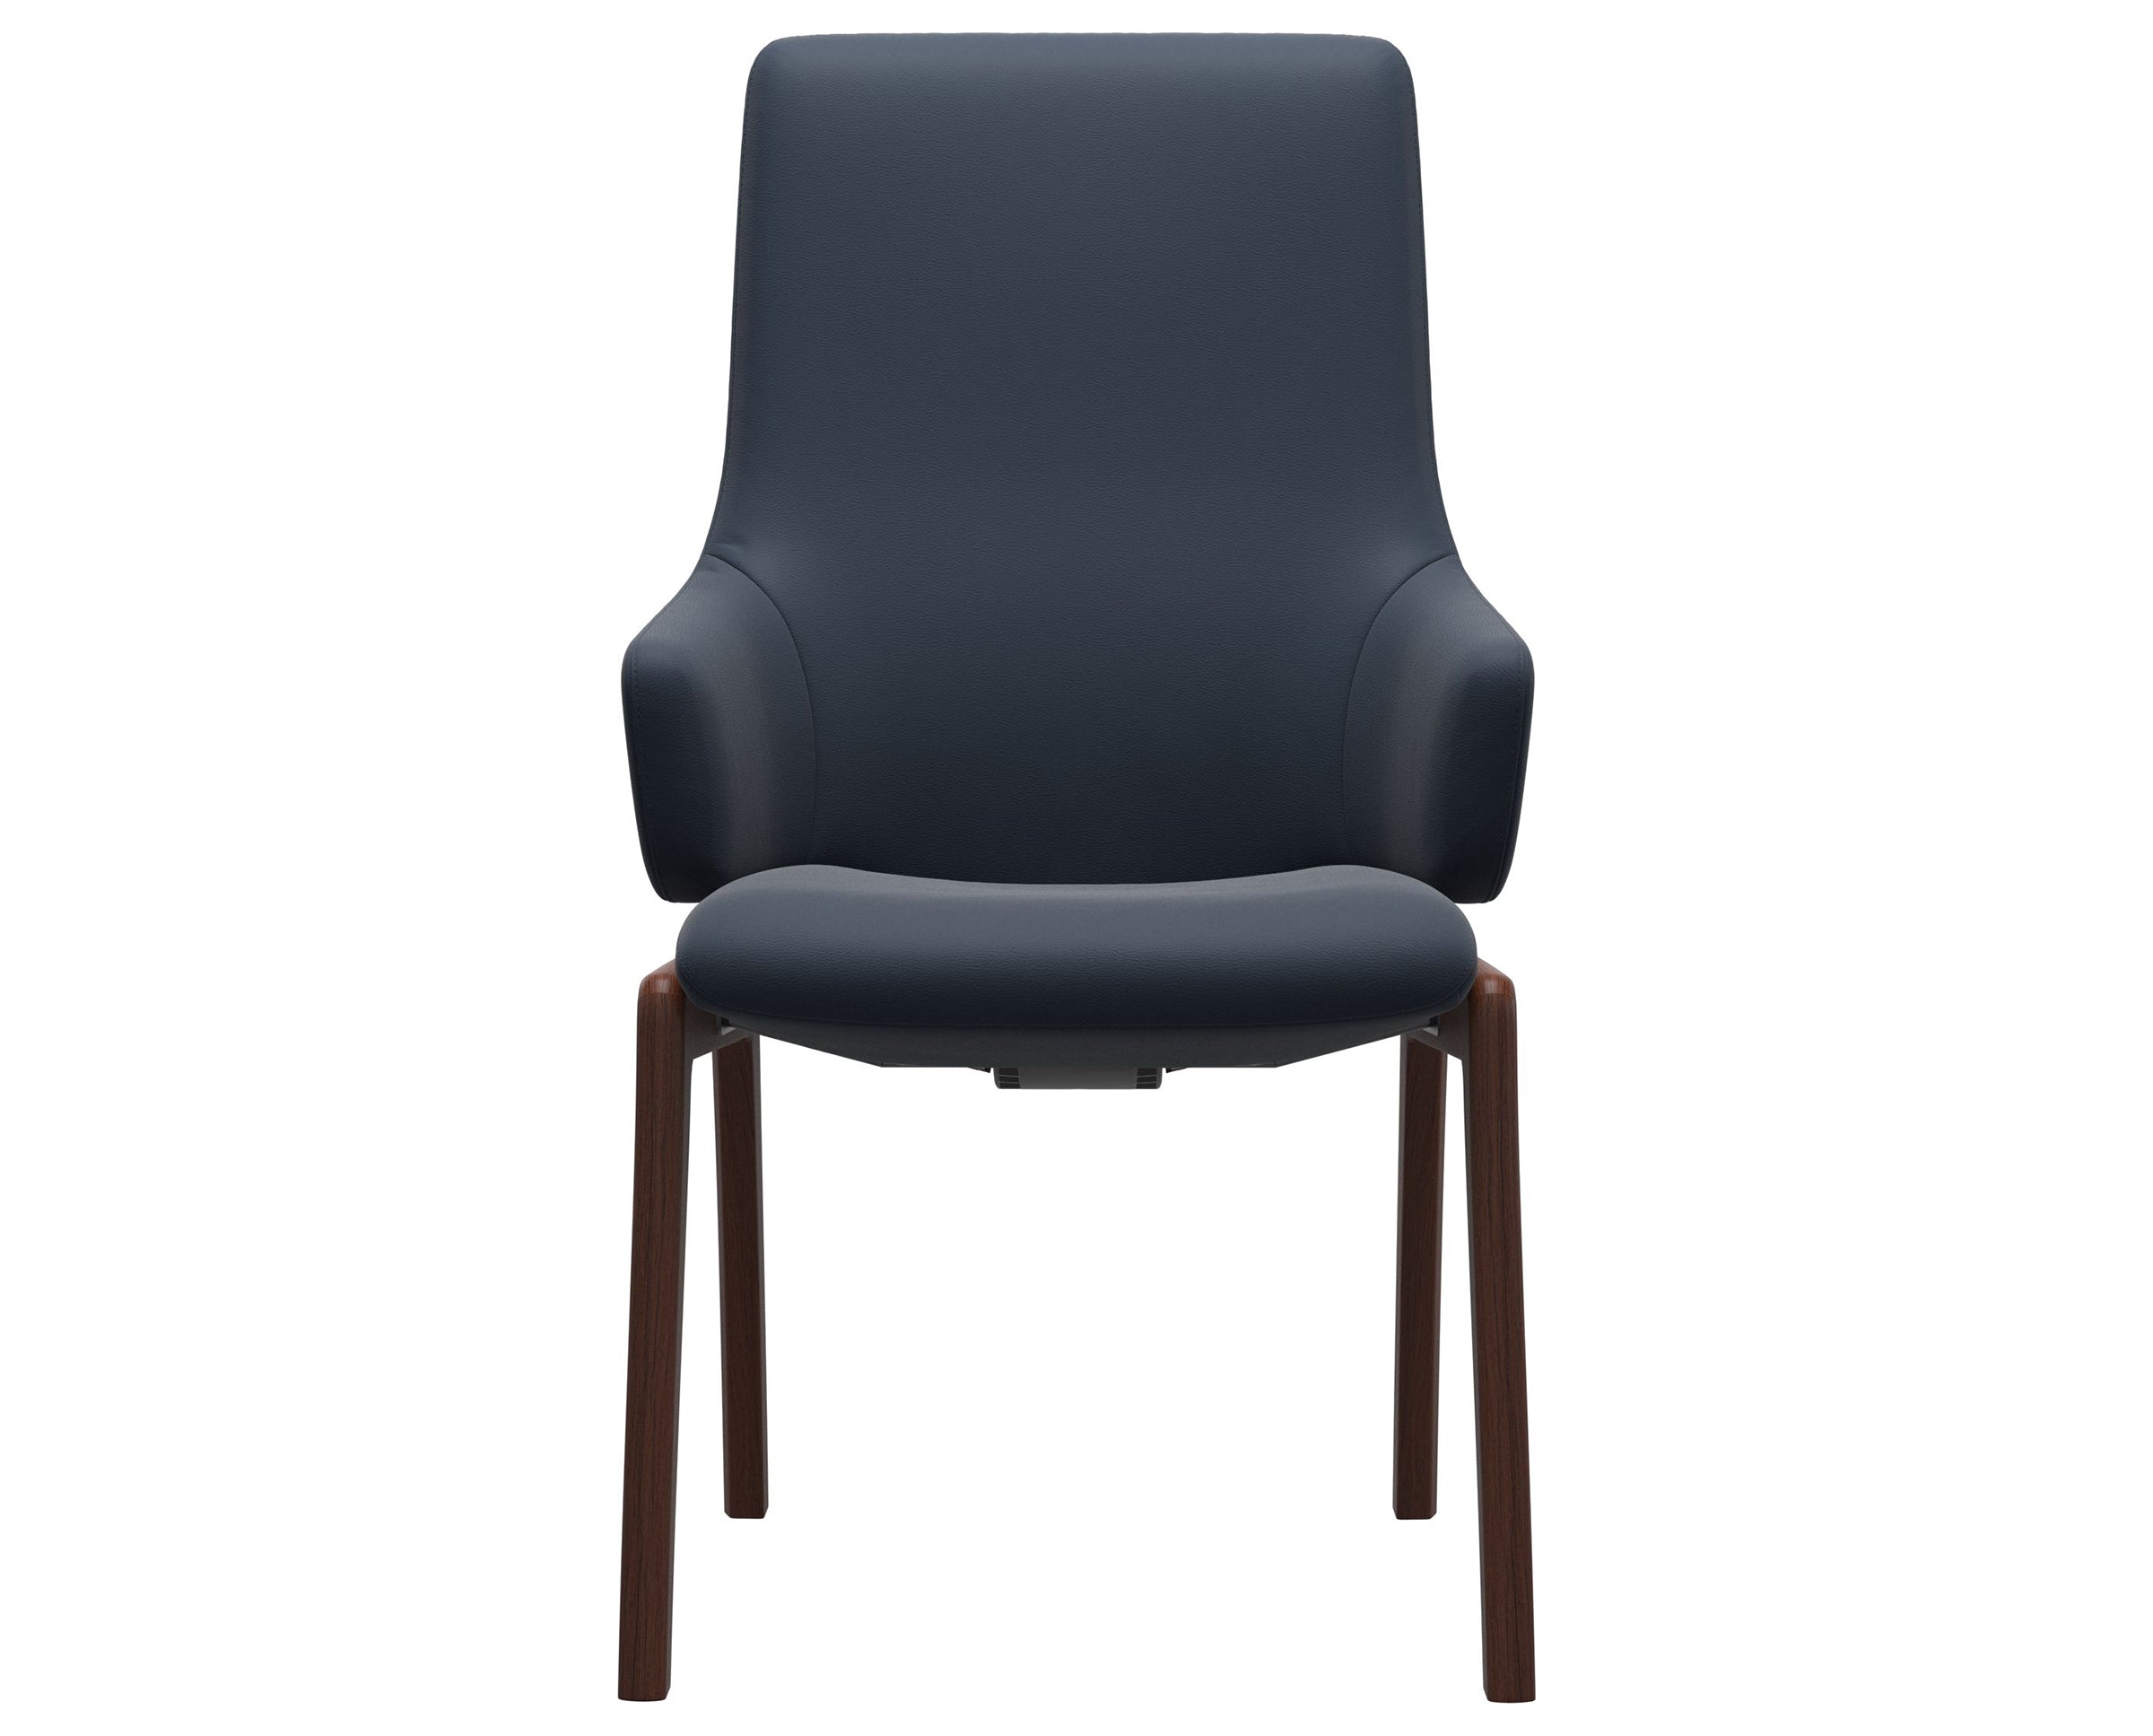 Paloma Leather Oxford Blue and Walnut Base | Stressless Laurel High Back D100 Dining Chair w/Arms | Valley Ridge Furniture